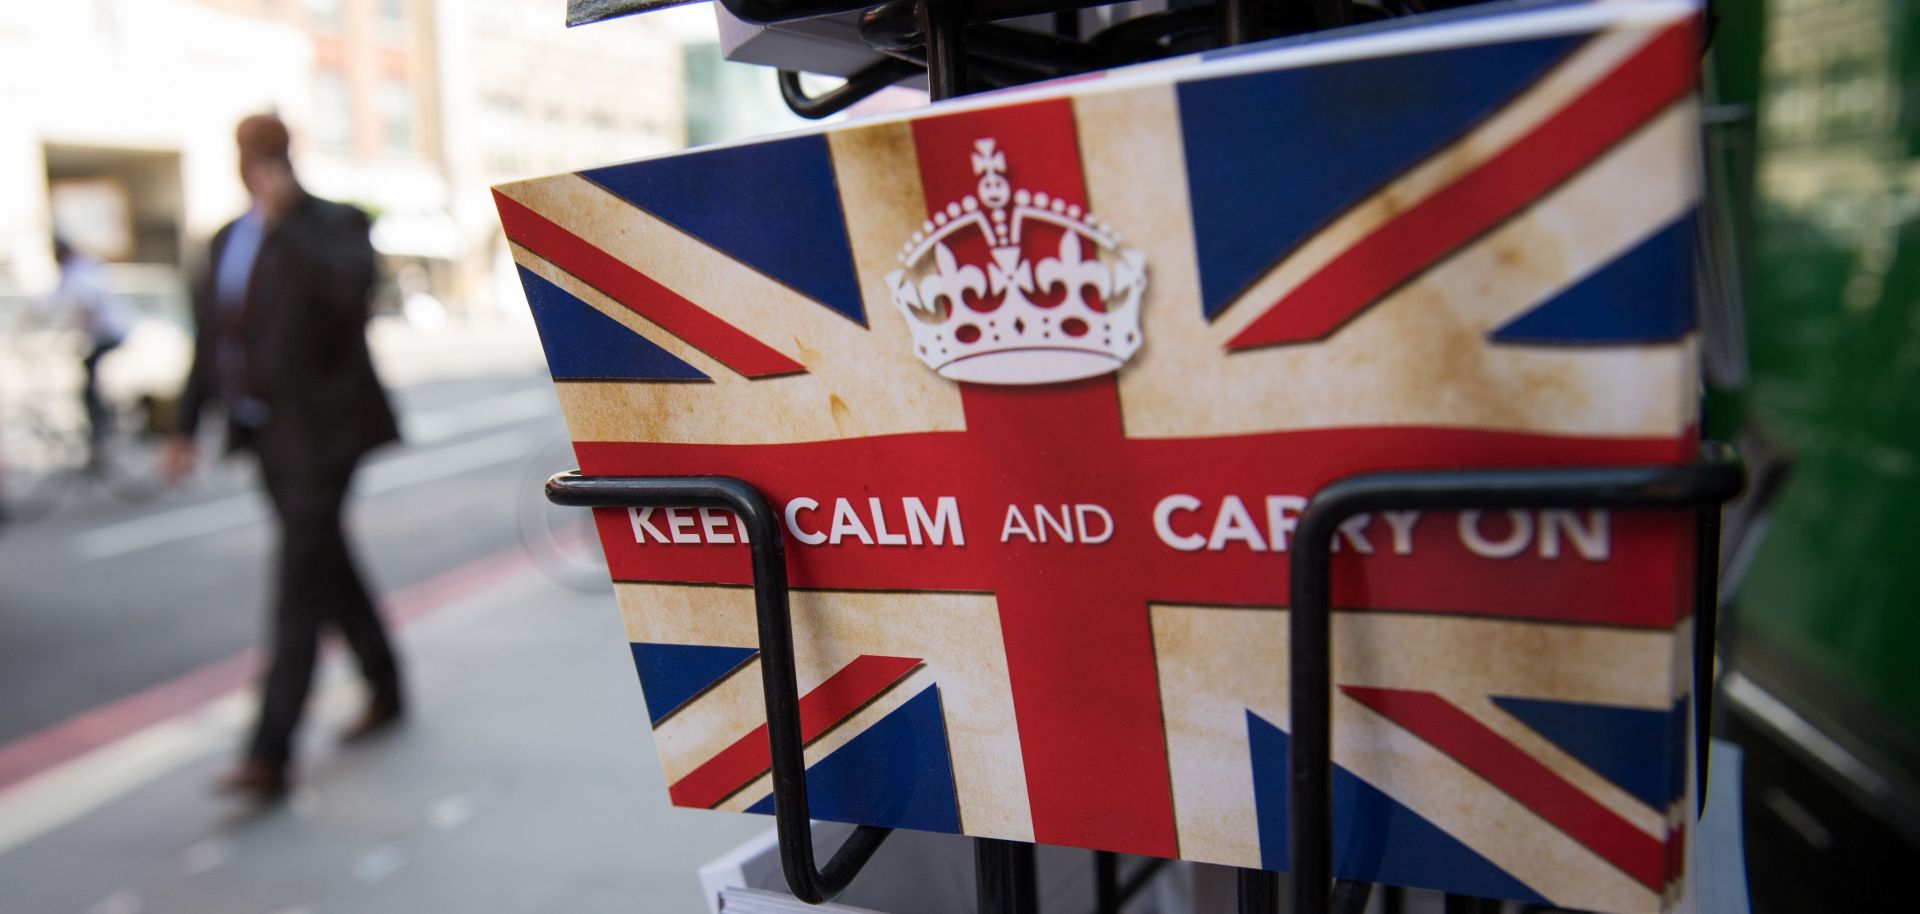 Postcards featuring the World War II British slogan "Keep Calm and Carry On" are seen in London on June 24, 2016.